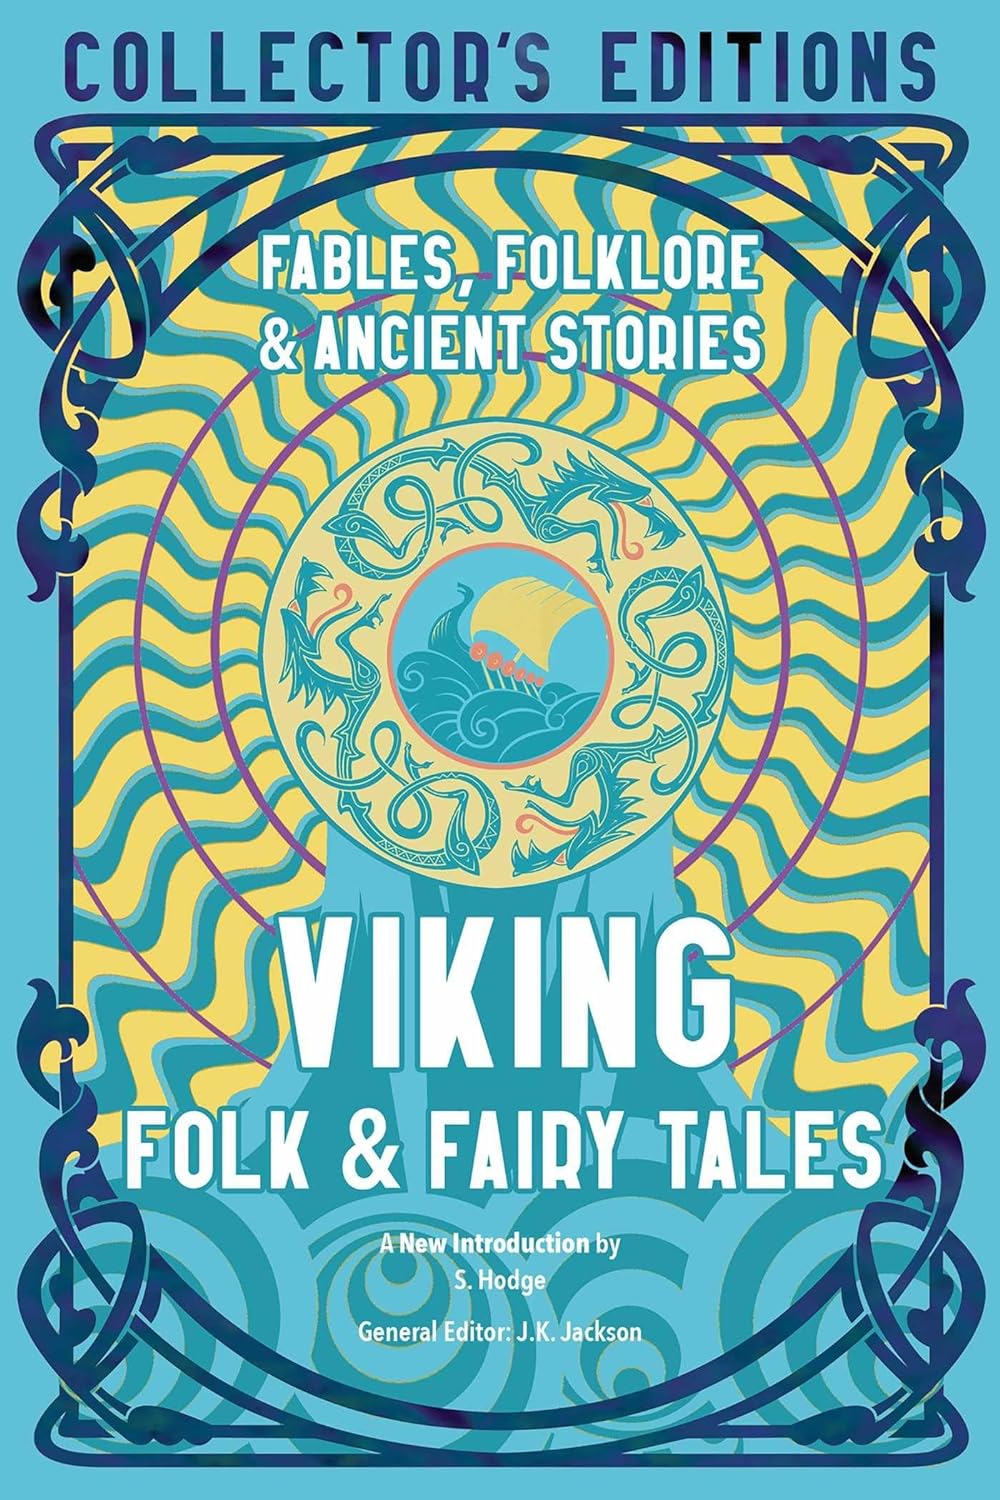 A blue and yellow book cover. At the top is dark blue text saying "collector's editions." Under the text is a yellow and blue nordic drawing of a ship on the water, encircled by sea serpents and wavy blue and yellow lines. White text says "viking folk & fairy tales." Behind the book is the open ocean under an orange sky, with Viking boats at full sail.